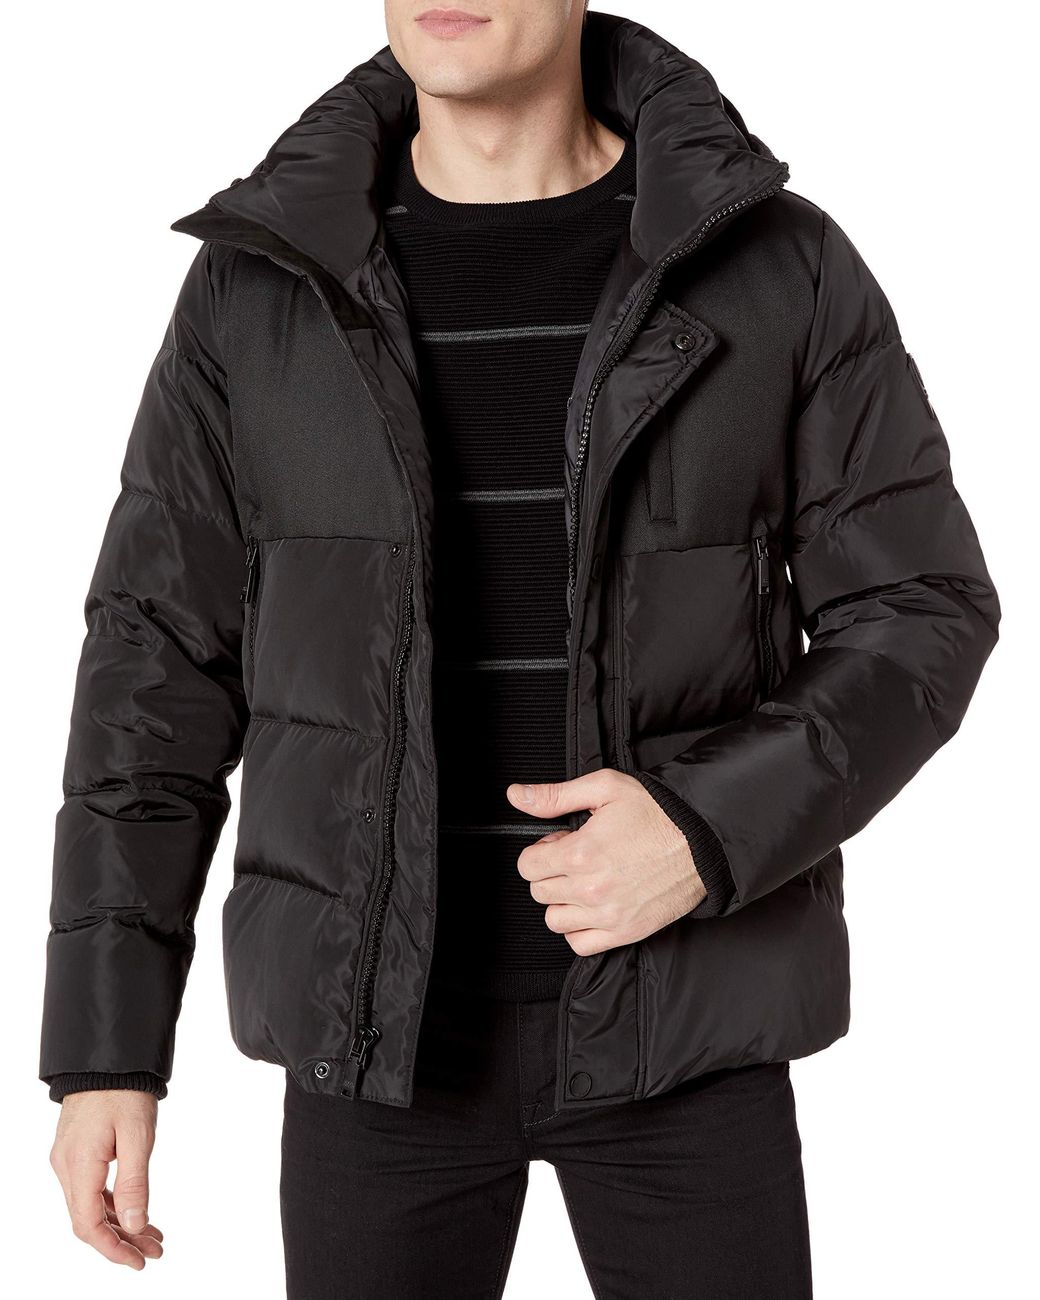 Vince Camuto Hooded Down Puffer Jacket in Black for Men - Lyst